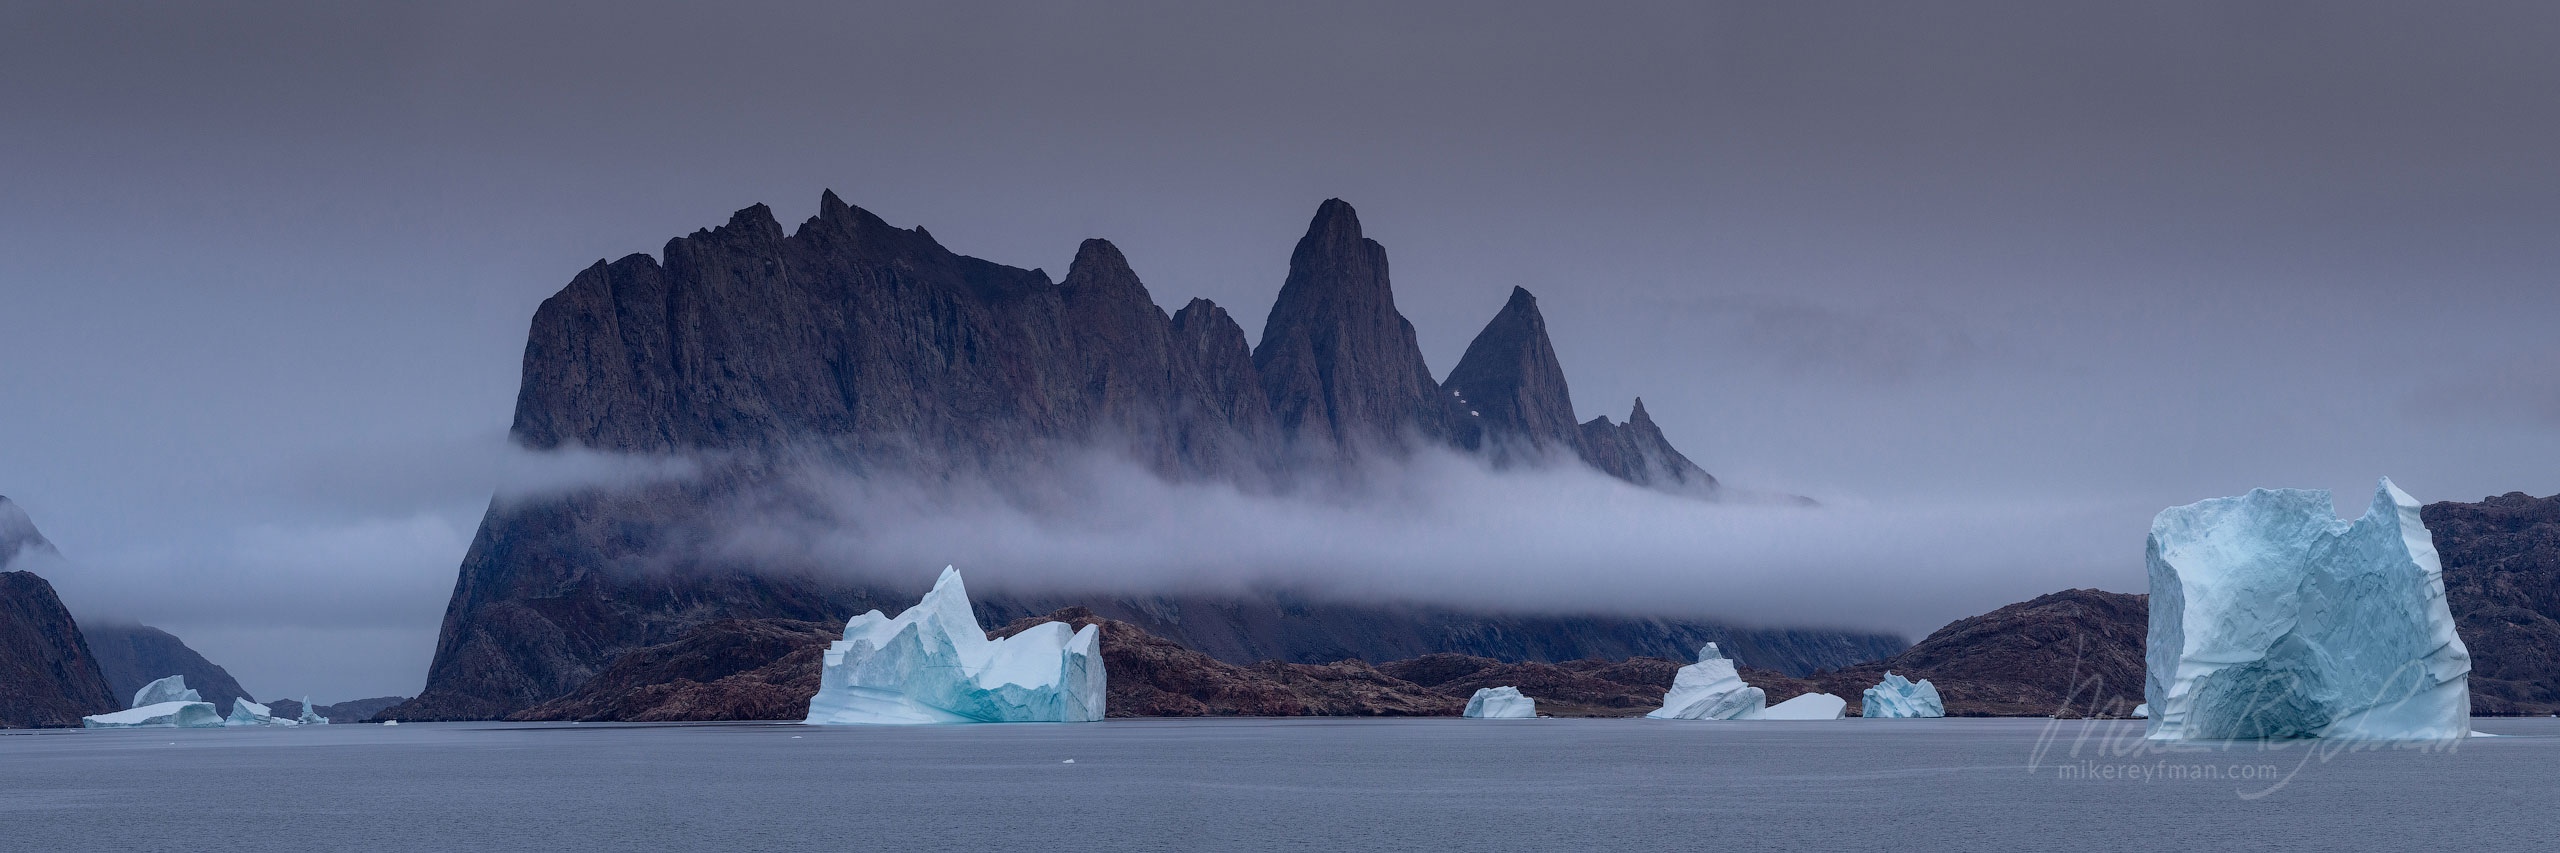 Bear Islands. Scoresby Sund. Greenland. 089-GR-SC_50B7959_Pano-1x3 - The Scoresby Sund fjord system and the settlement of Ittoqqortoormiit. East Greenland. - Mike Reyfman Photography